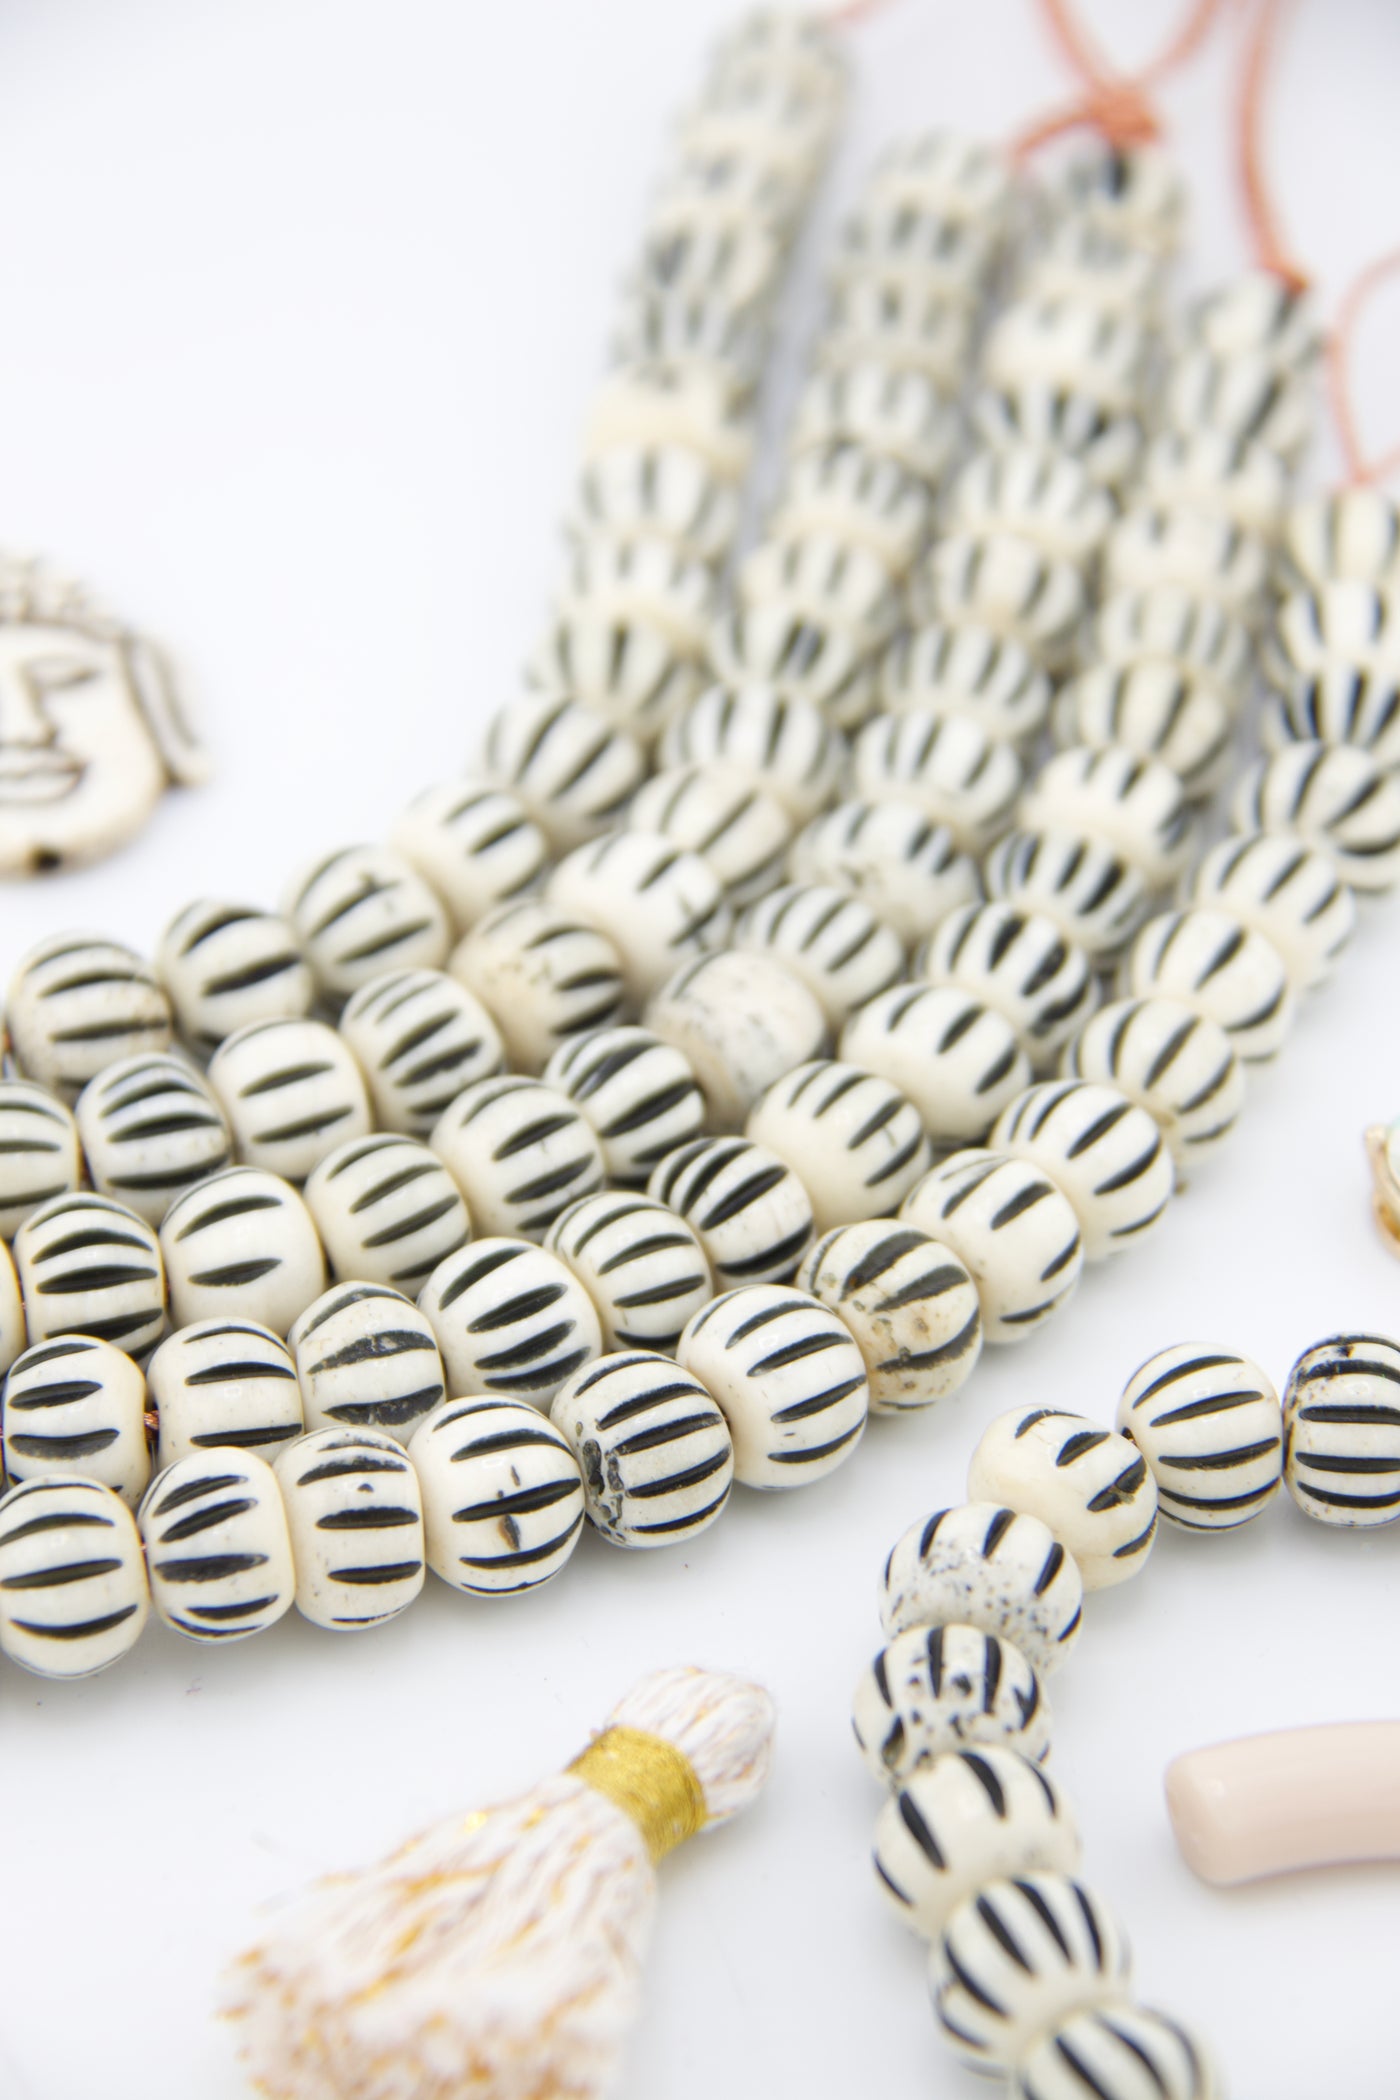 Cream & Black Striped Hand Carved Melon Bone Beads, 12mm for making DIY beaded jewelry